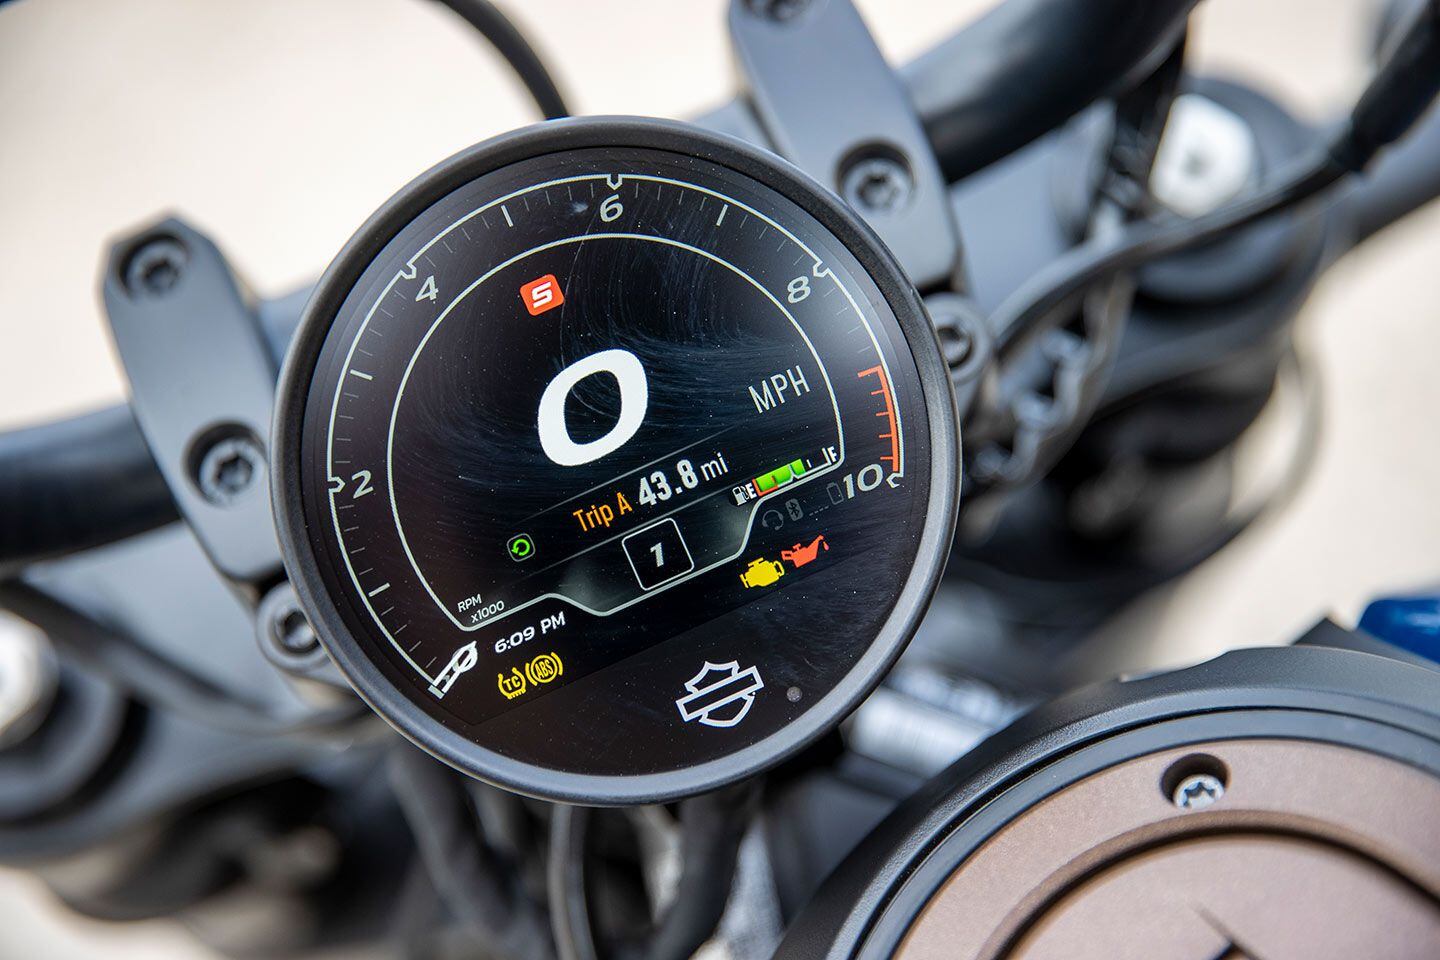 The 4-inch-diameter TFT display doesn't feel busy, and is easy to navigate when it comes time to adjust rider modes.